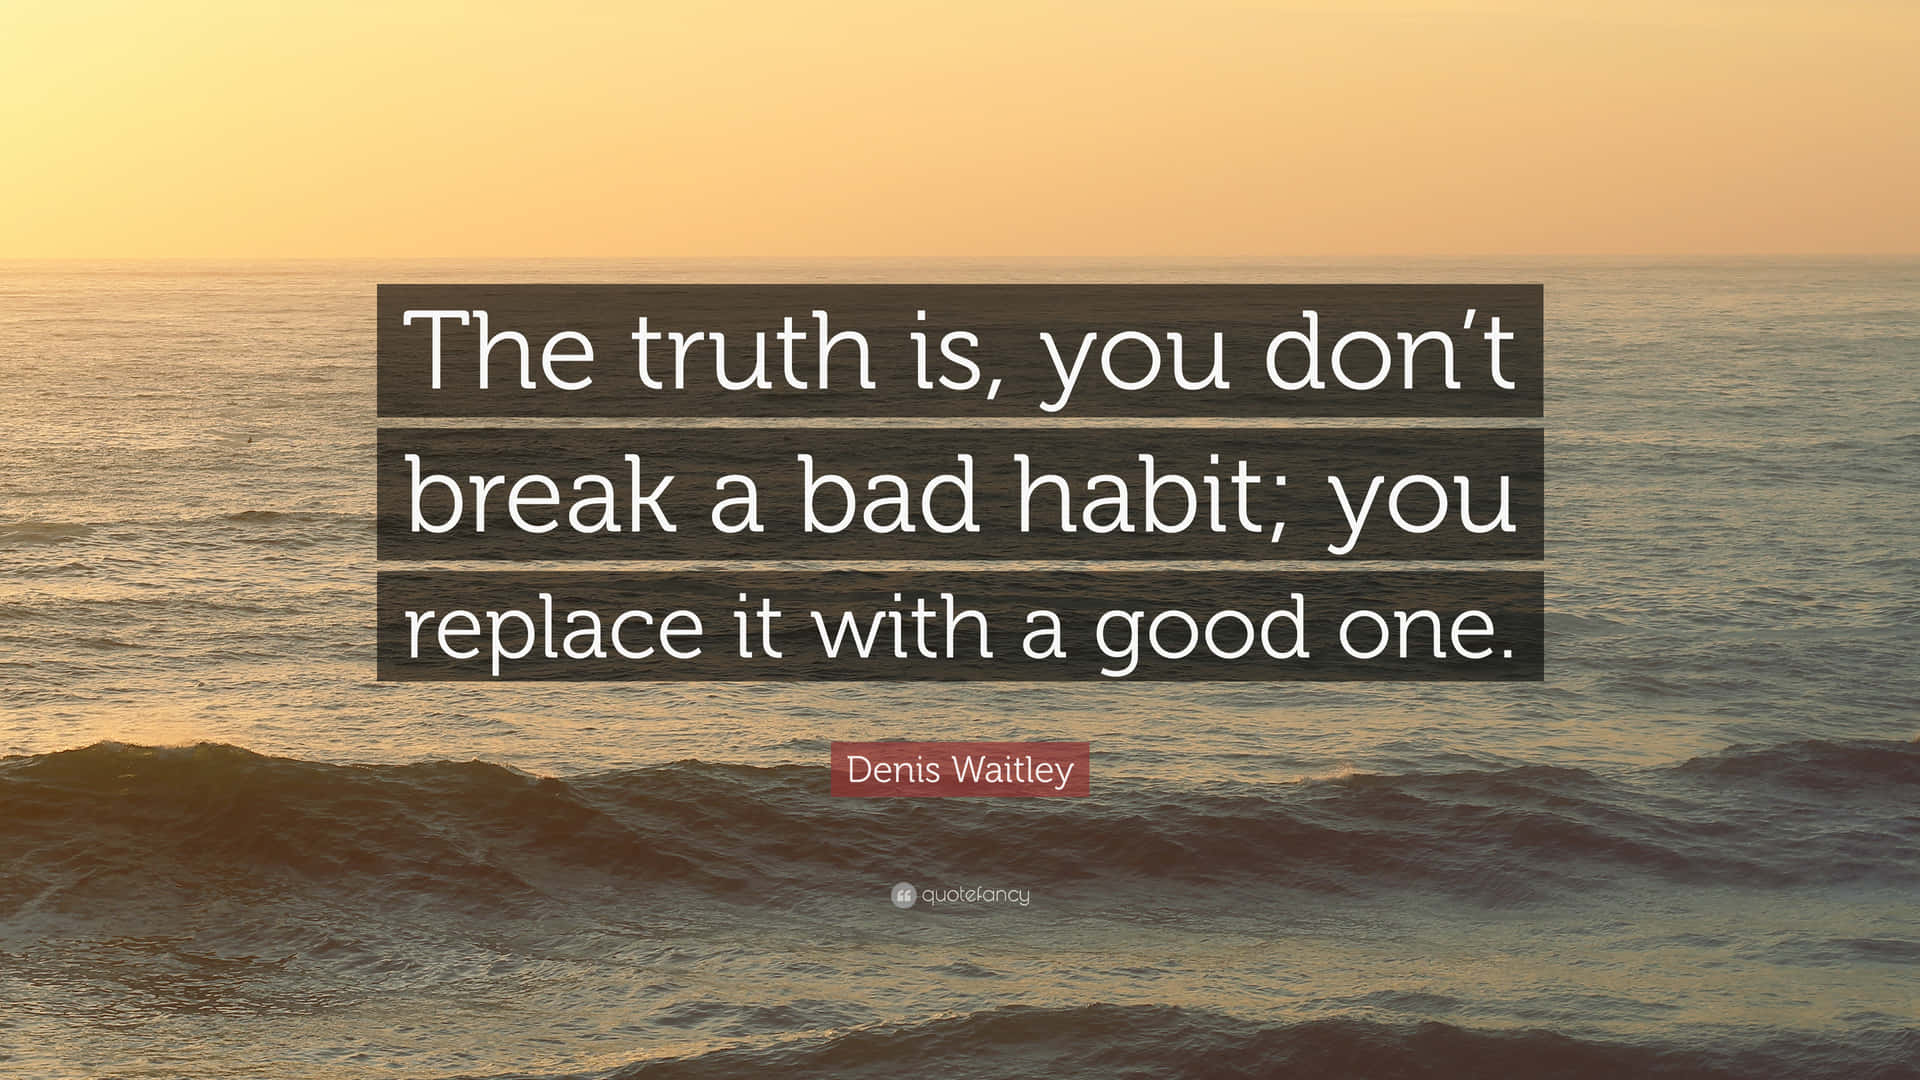 The Truth Is You Don't Break A Bad Habit You Replace It With A Good One